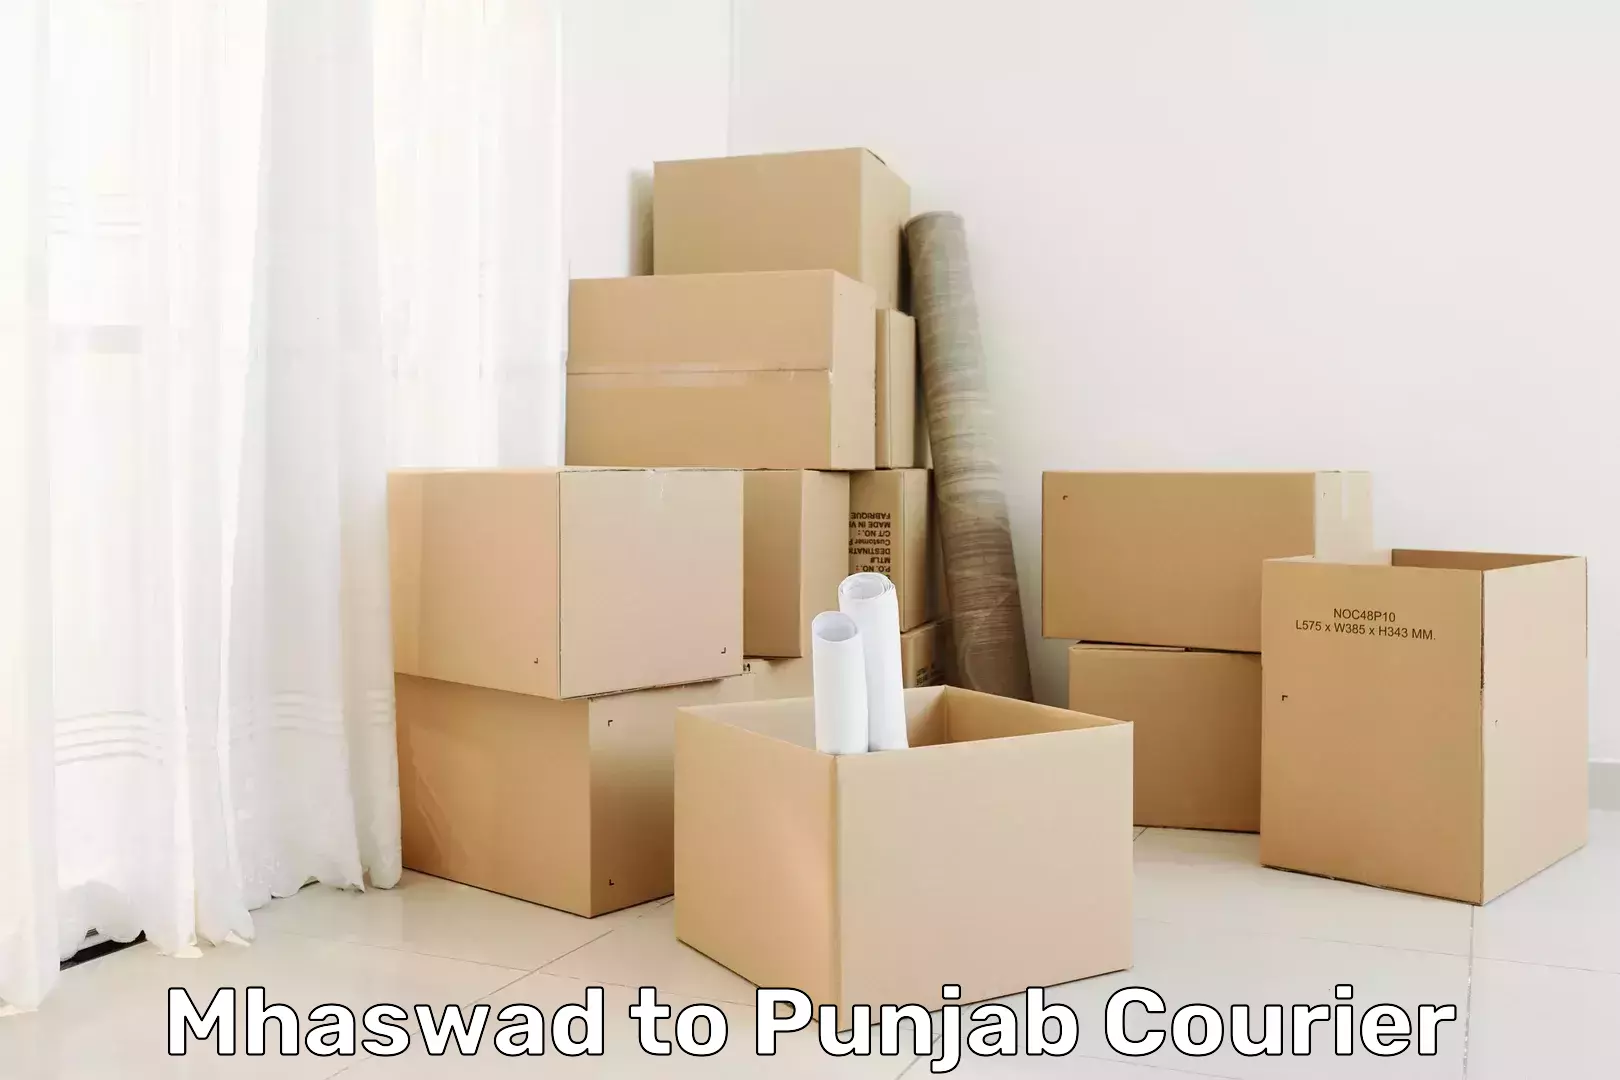 Next-day freight services Mhaswad to Punjab